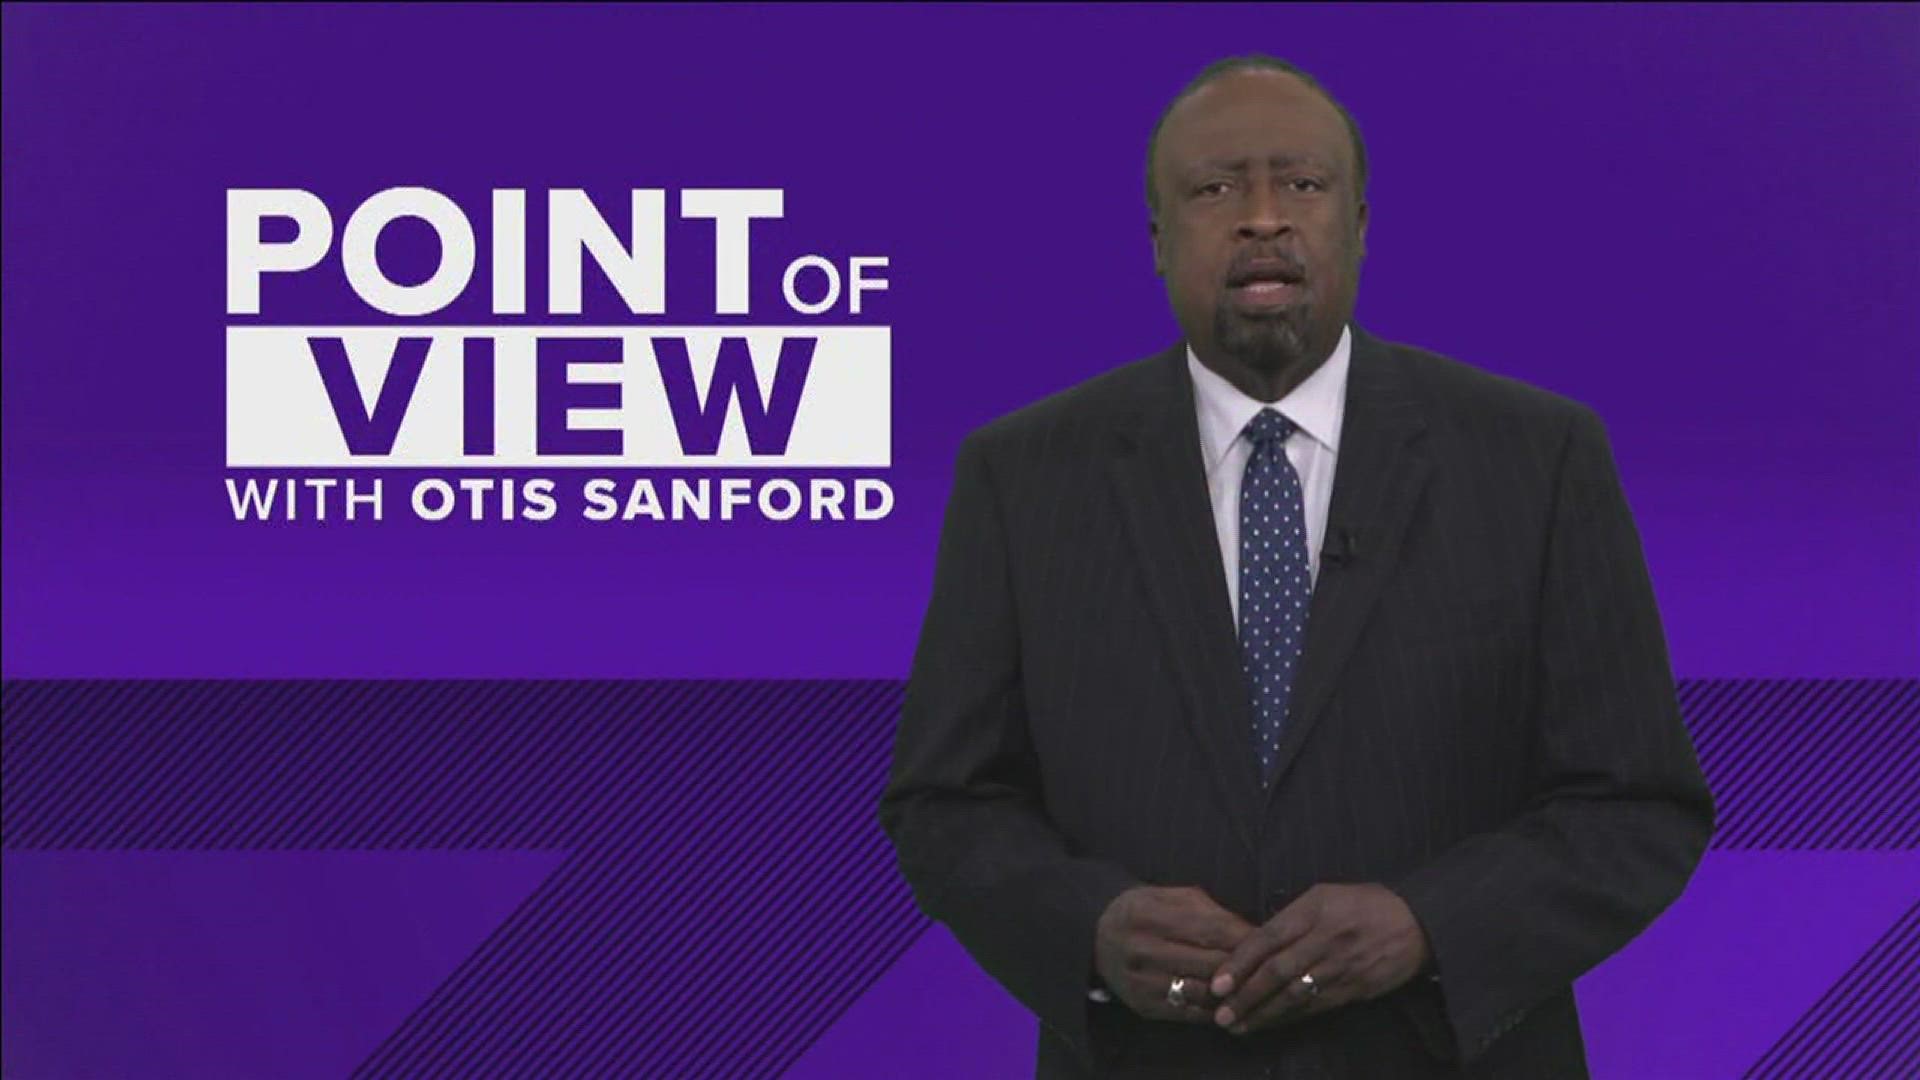 Otis Sanford gives his point of view on the latest developments in the search for the next MSCS superintendent.